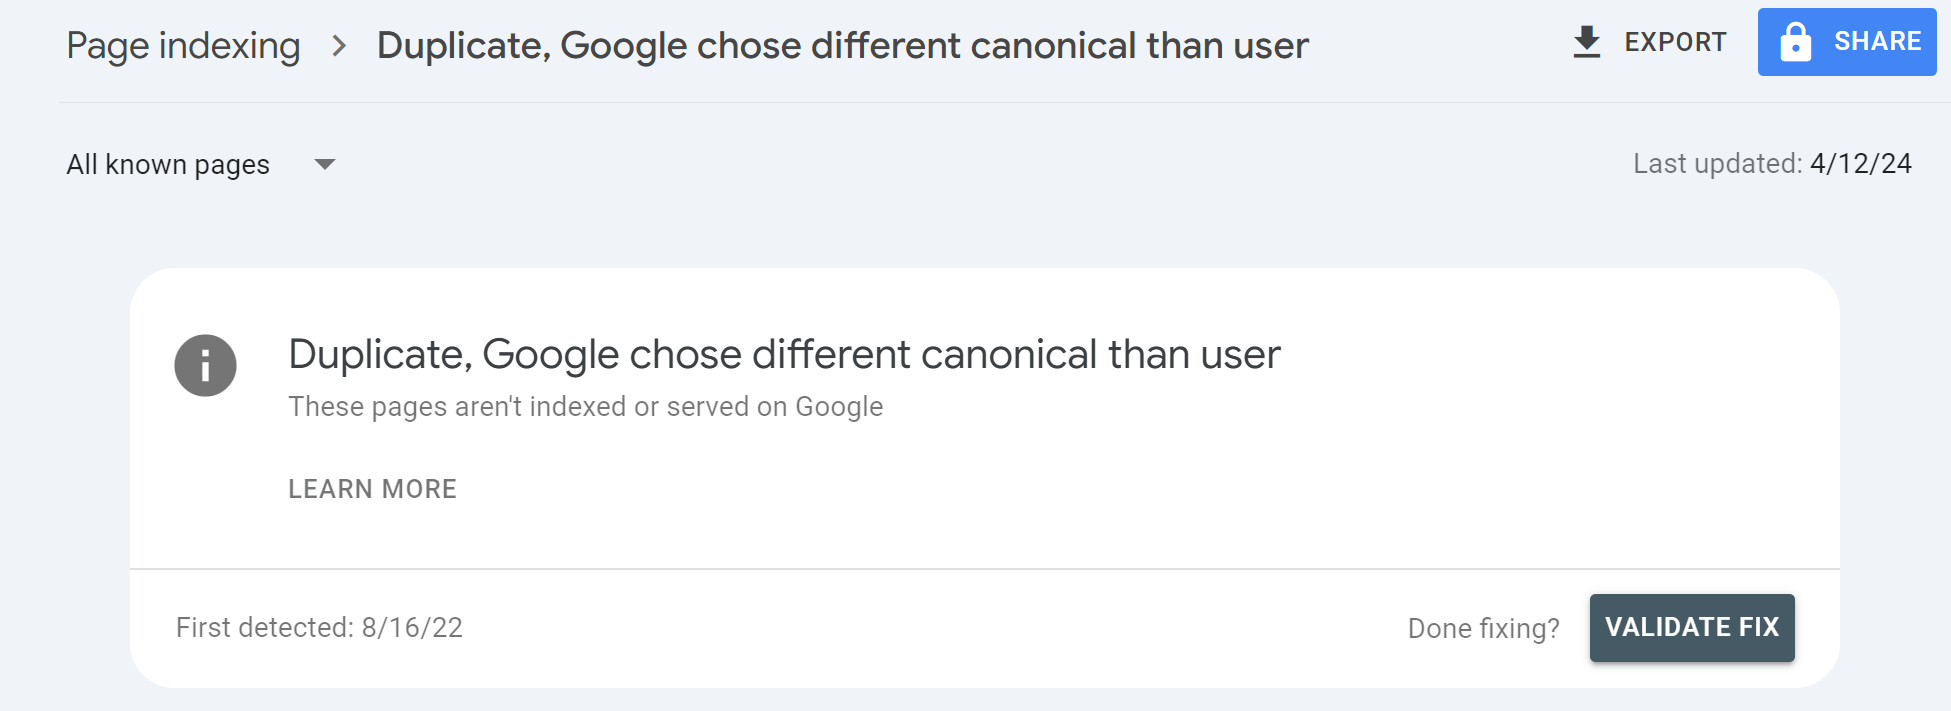 Duplicate, Google chooses a different canonical than user error in the GSC Page indexing report